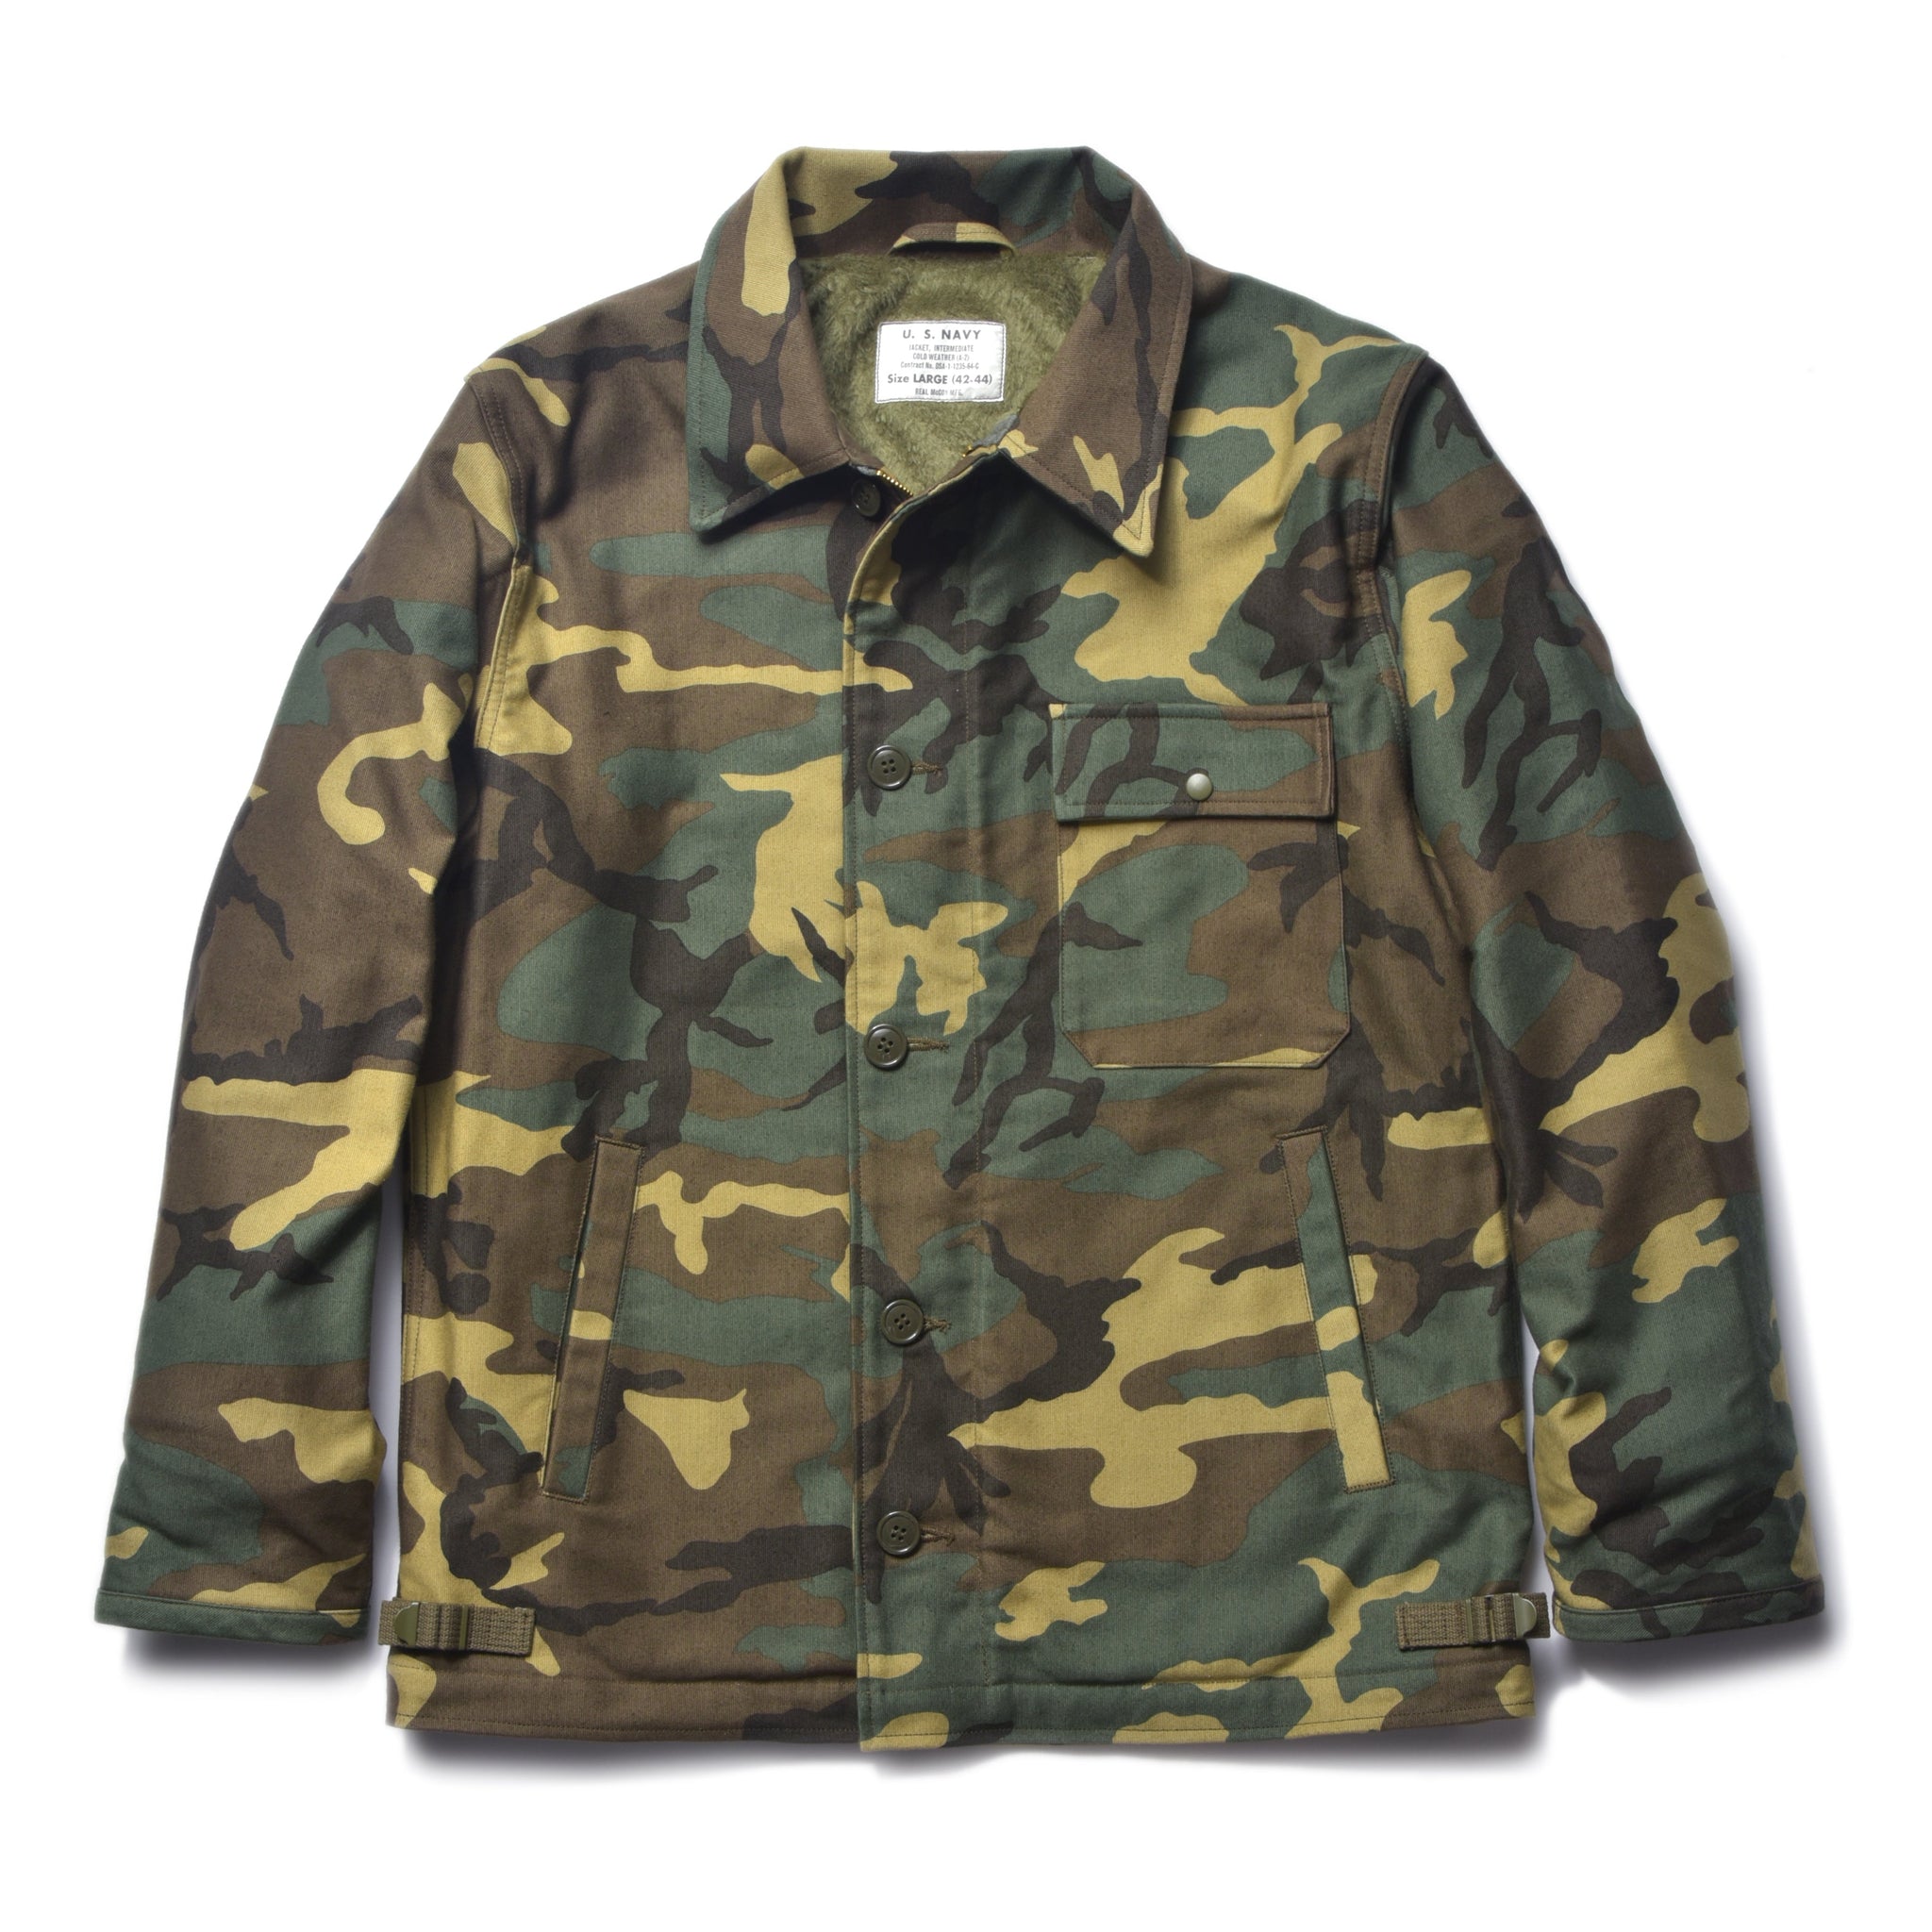 Urban Renewal Vintage Heavyweight Camo Jacket | Urban Outfitters Singapore  - Clothing, Music, Home & Accessories